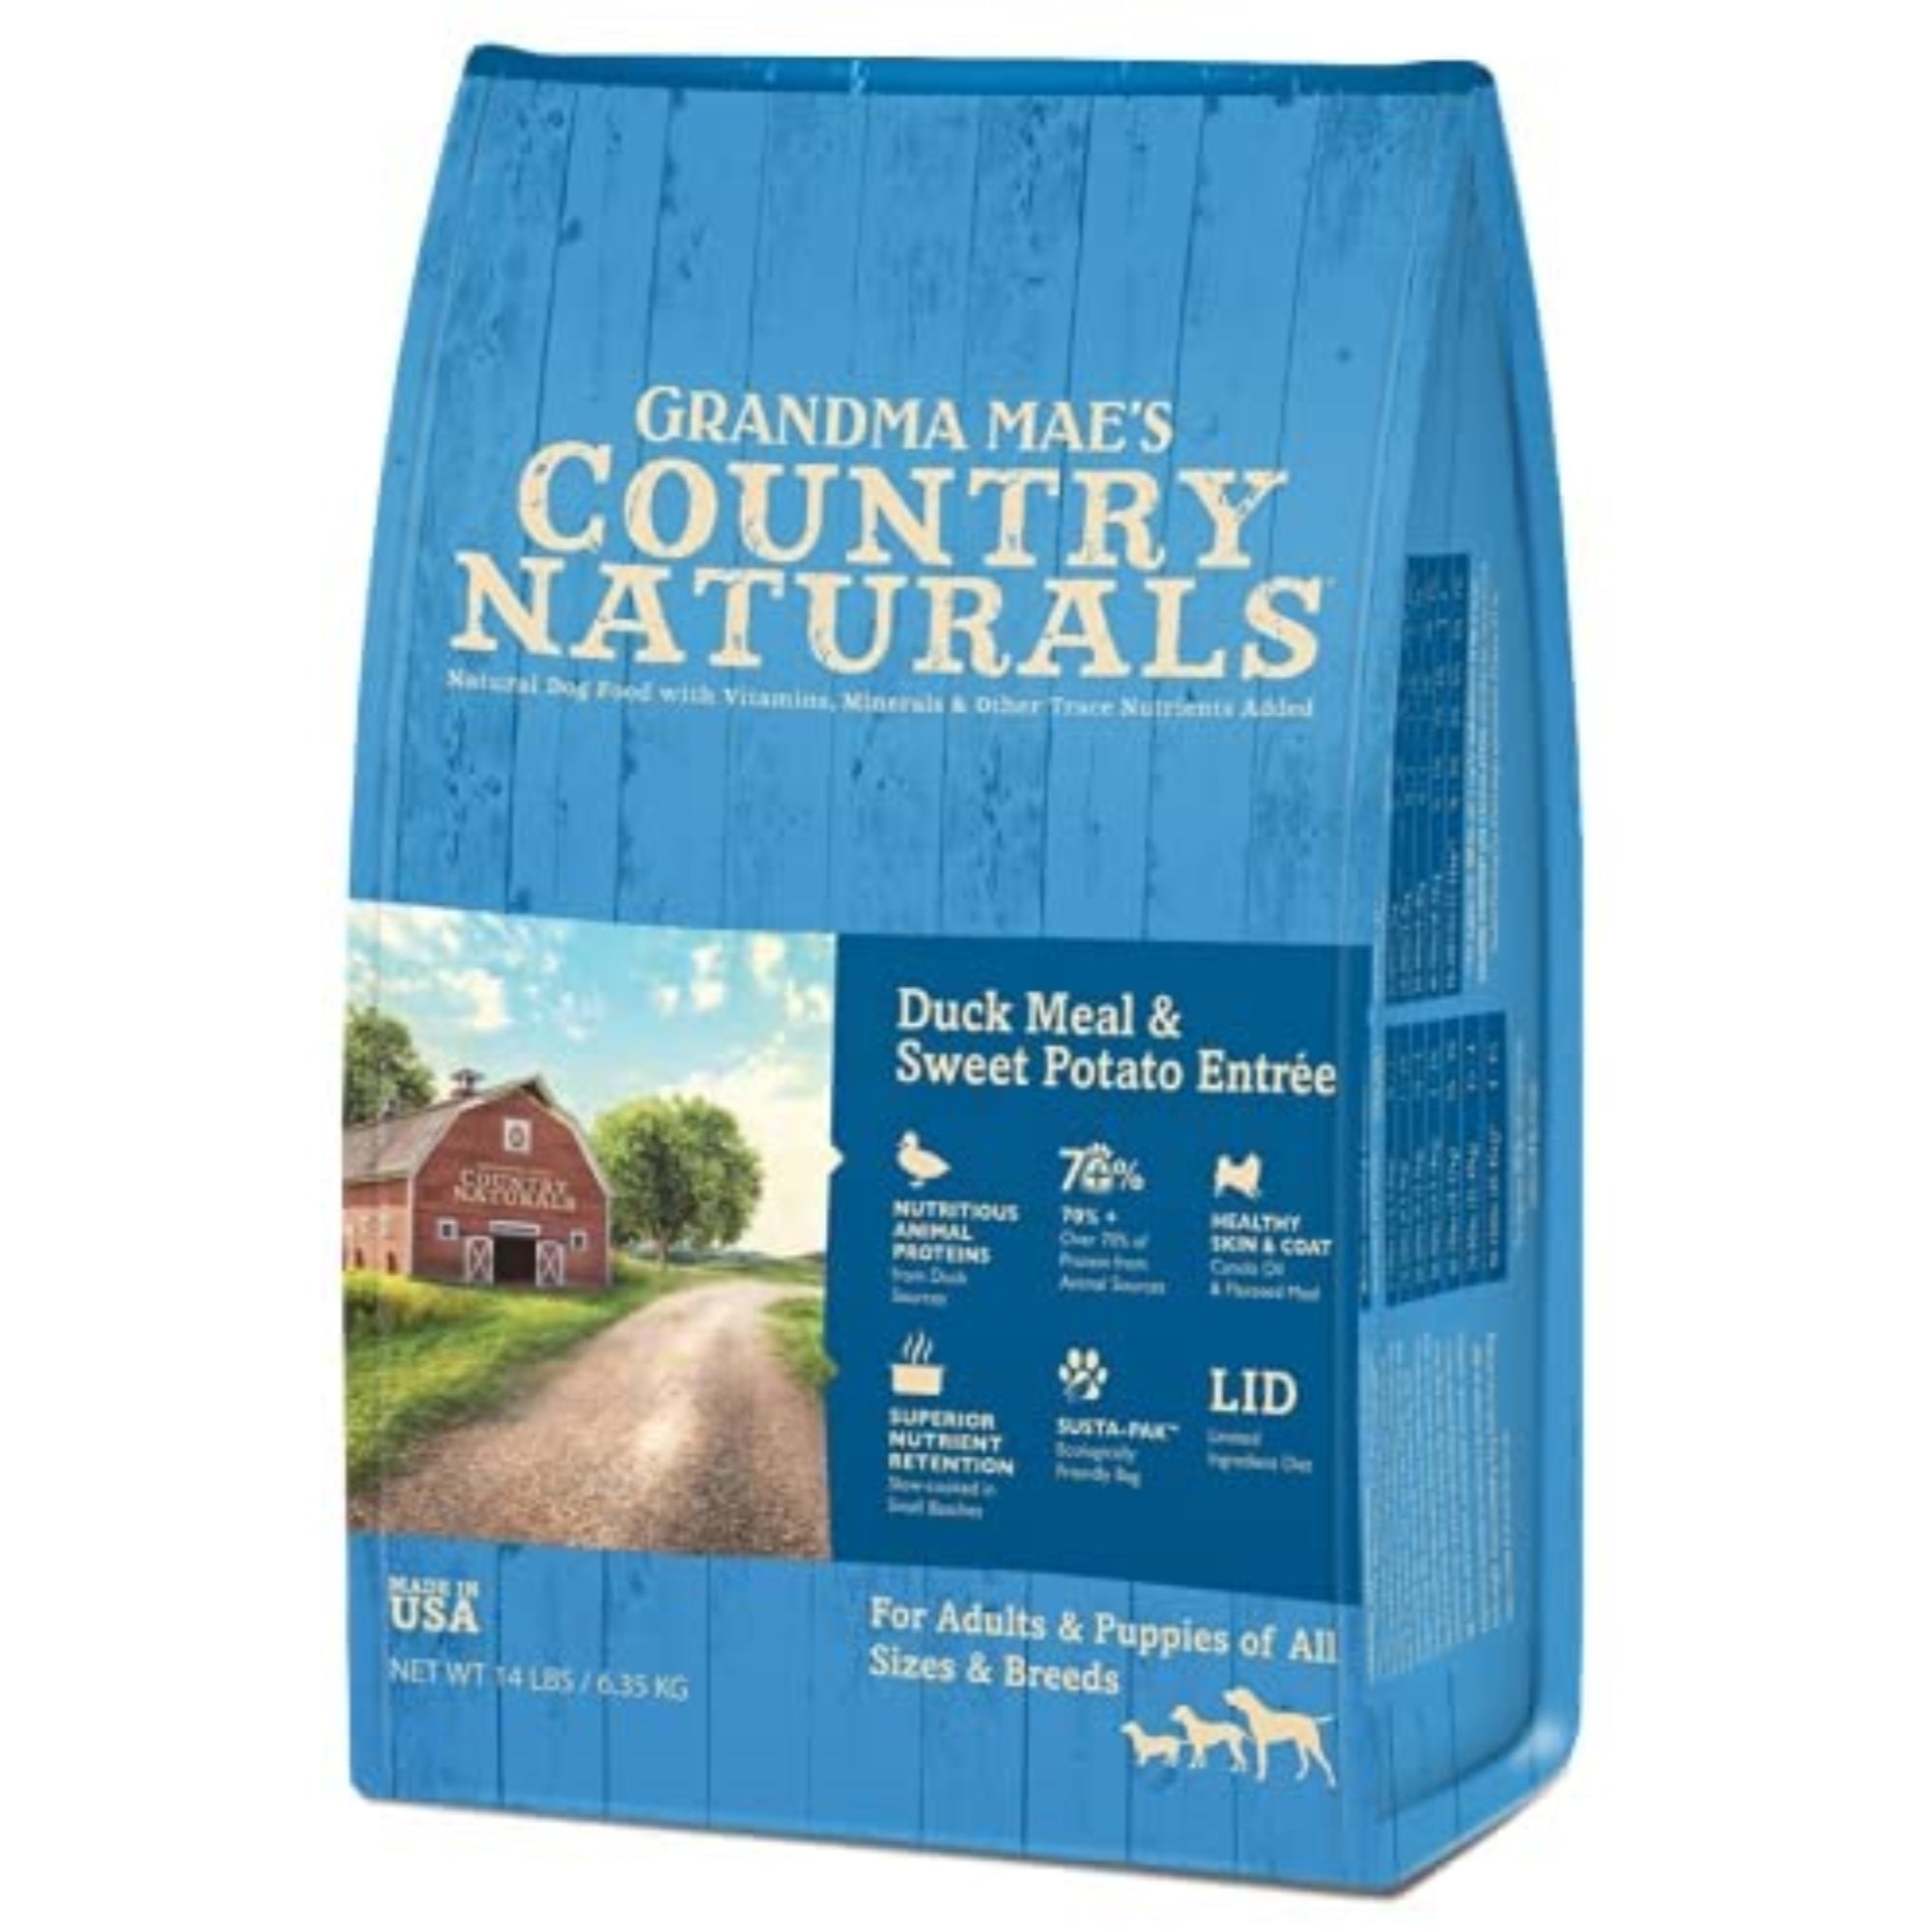 Grandma Mae’s Country Naturals Duck Meal/Sweet Potato Limited Ingredient Dog Food, 14 LB